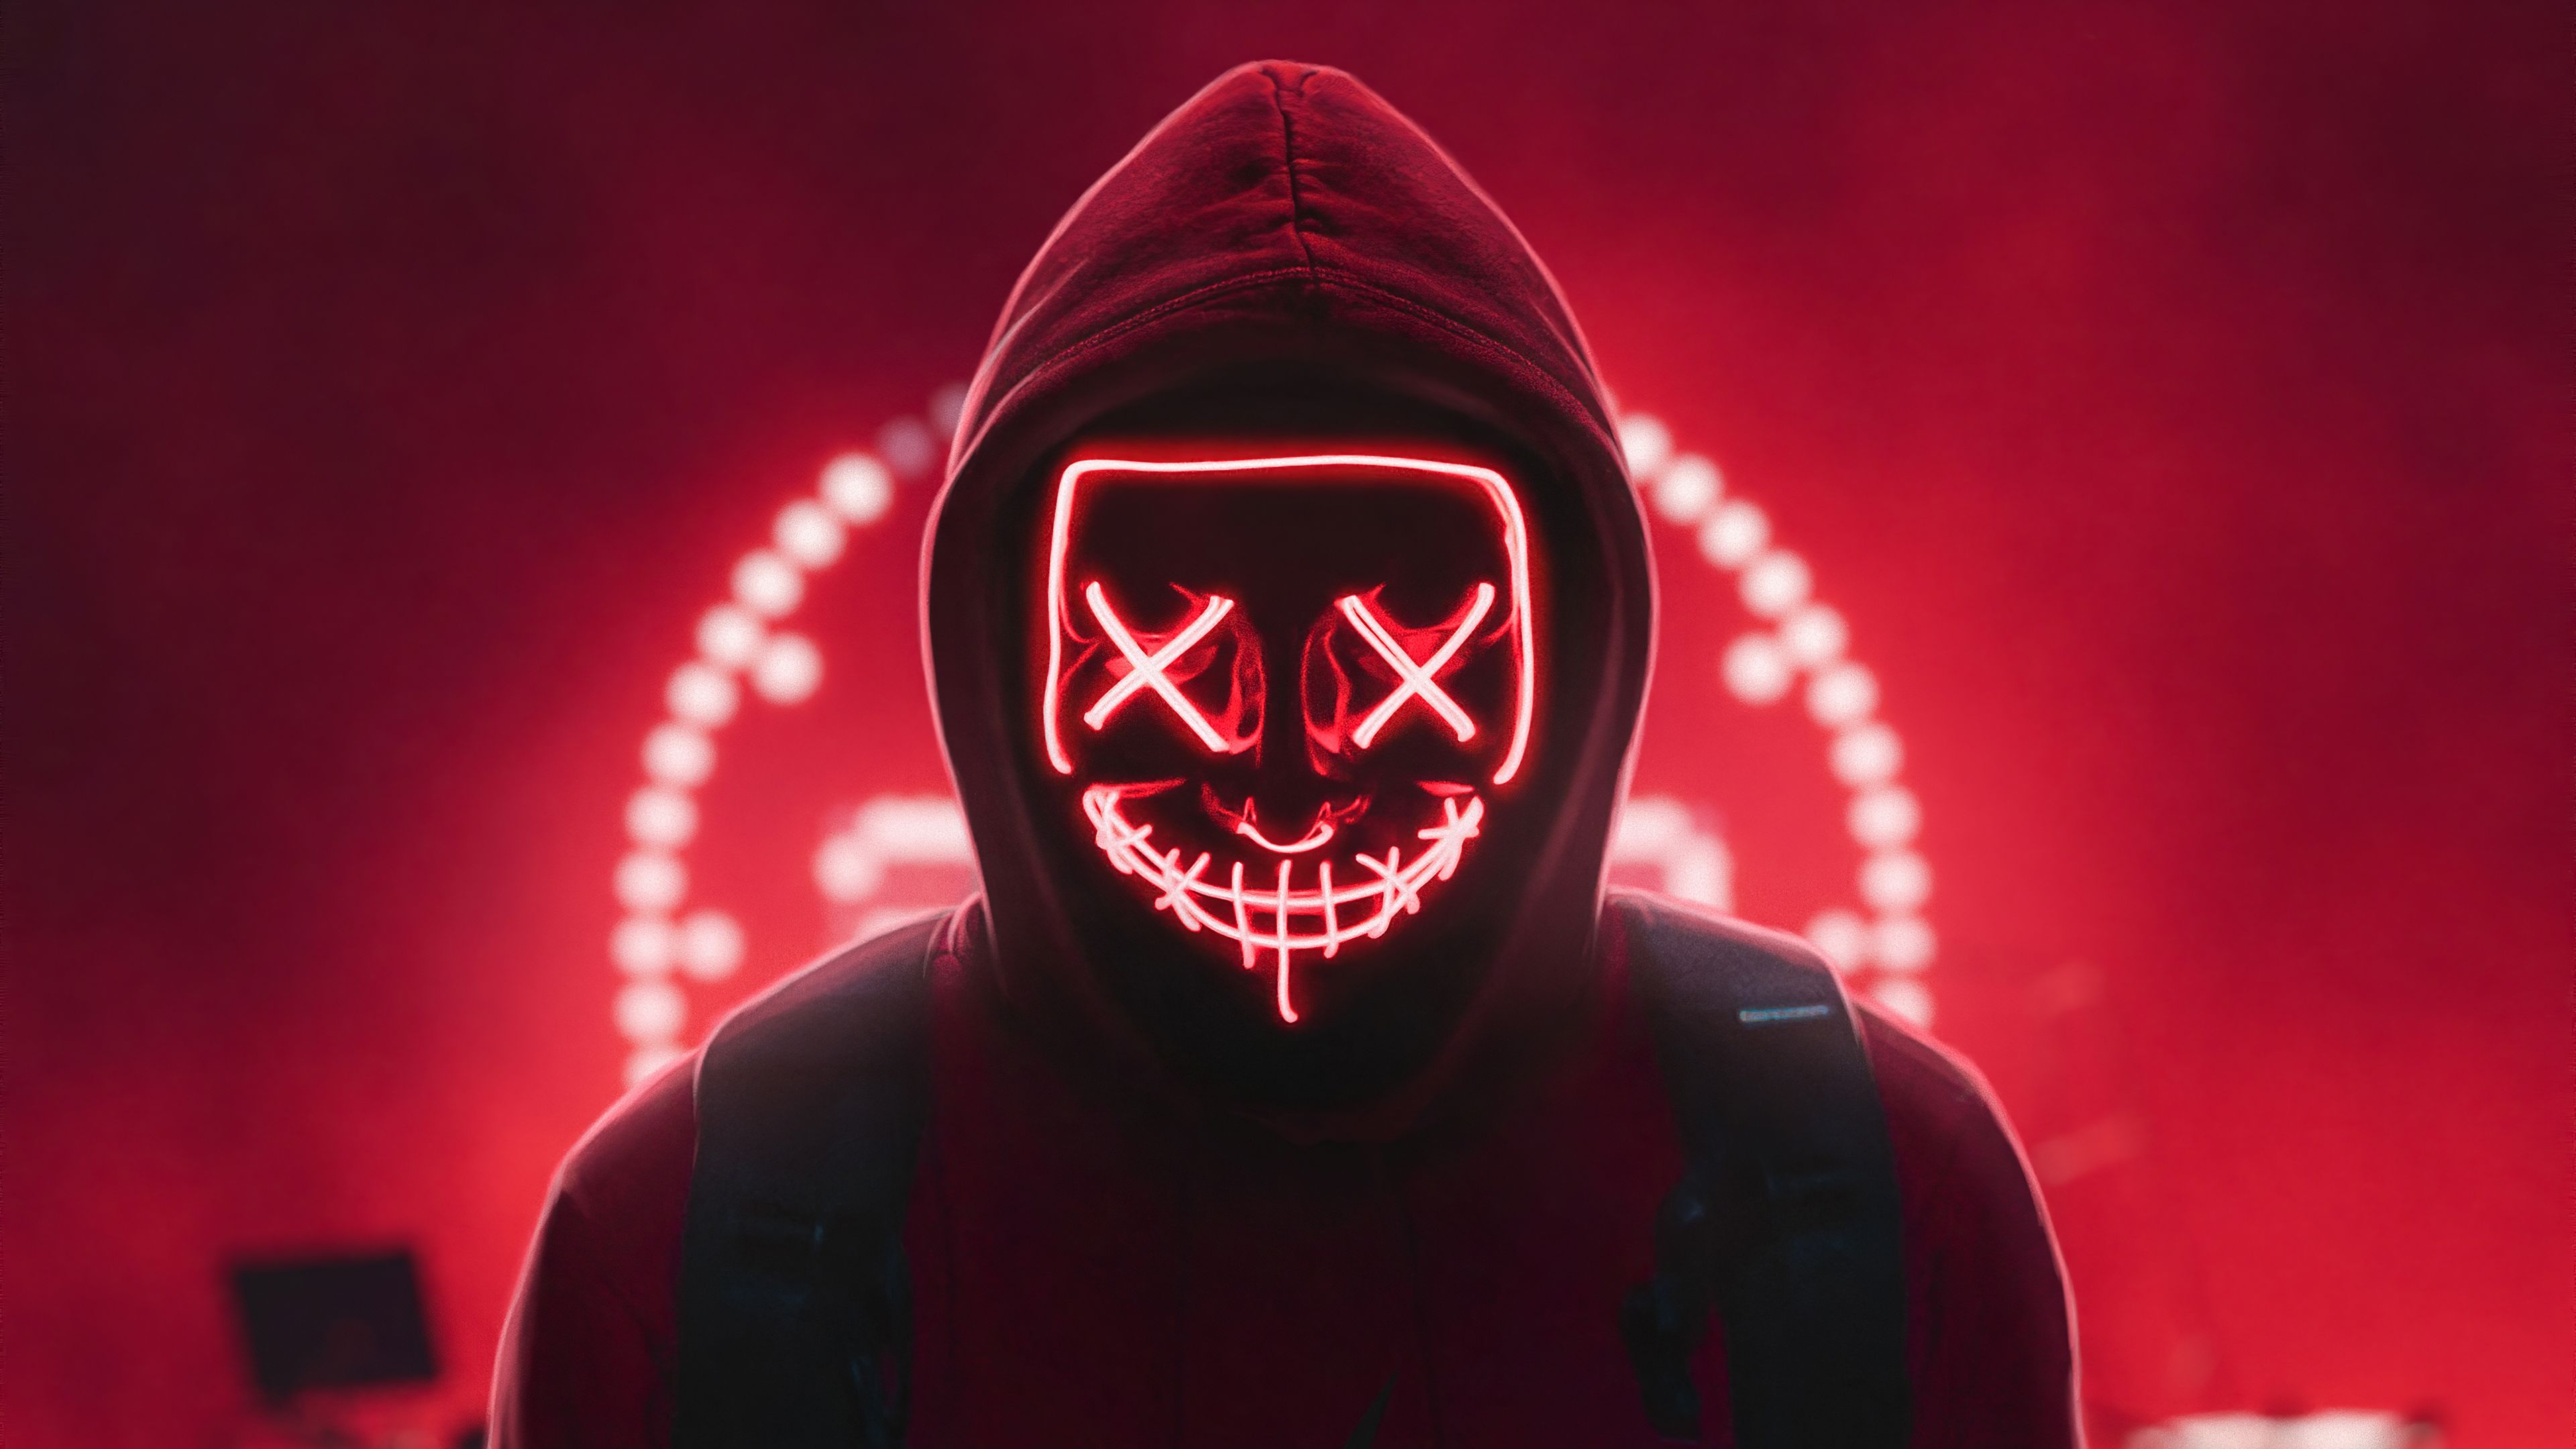 Neon Man 4k, HD Photography, 4k Wallpaper, Image, Background, Photo and Picture